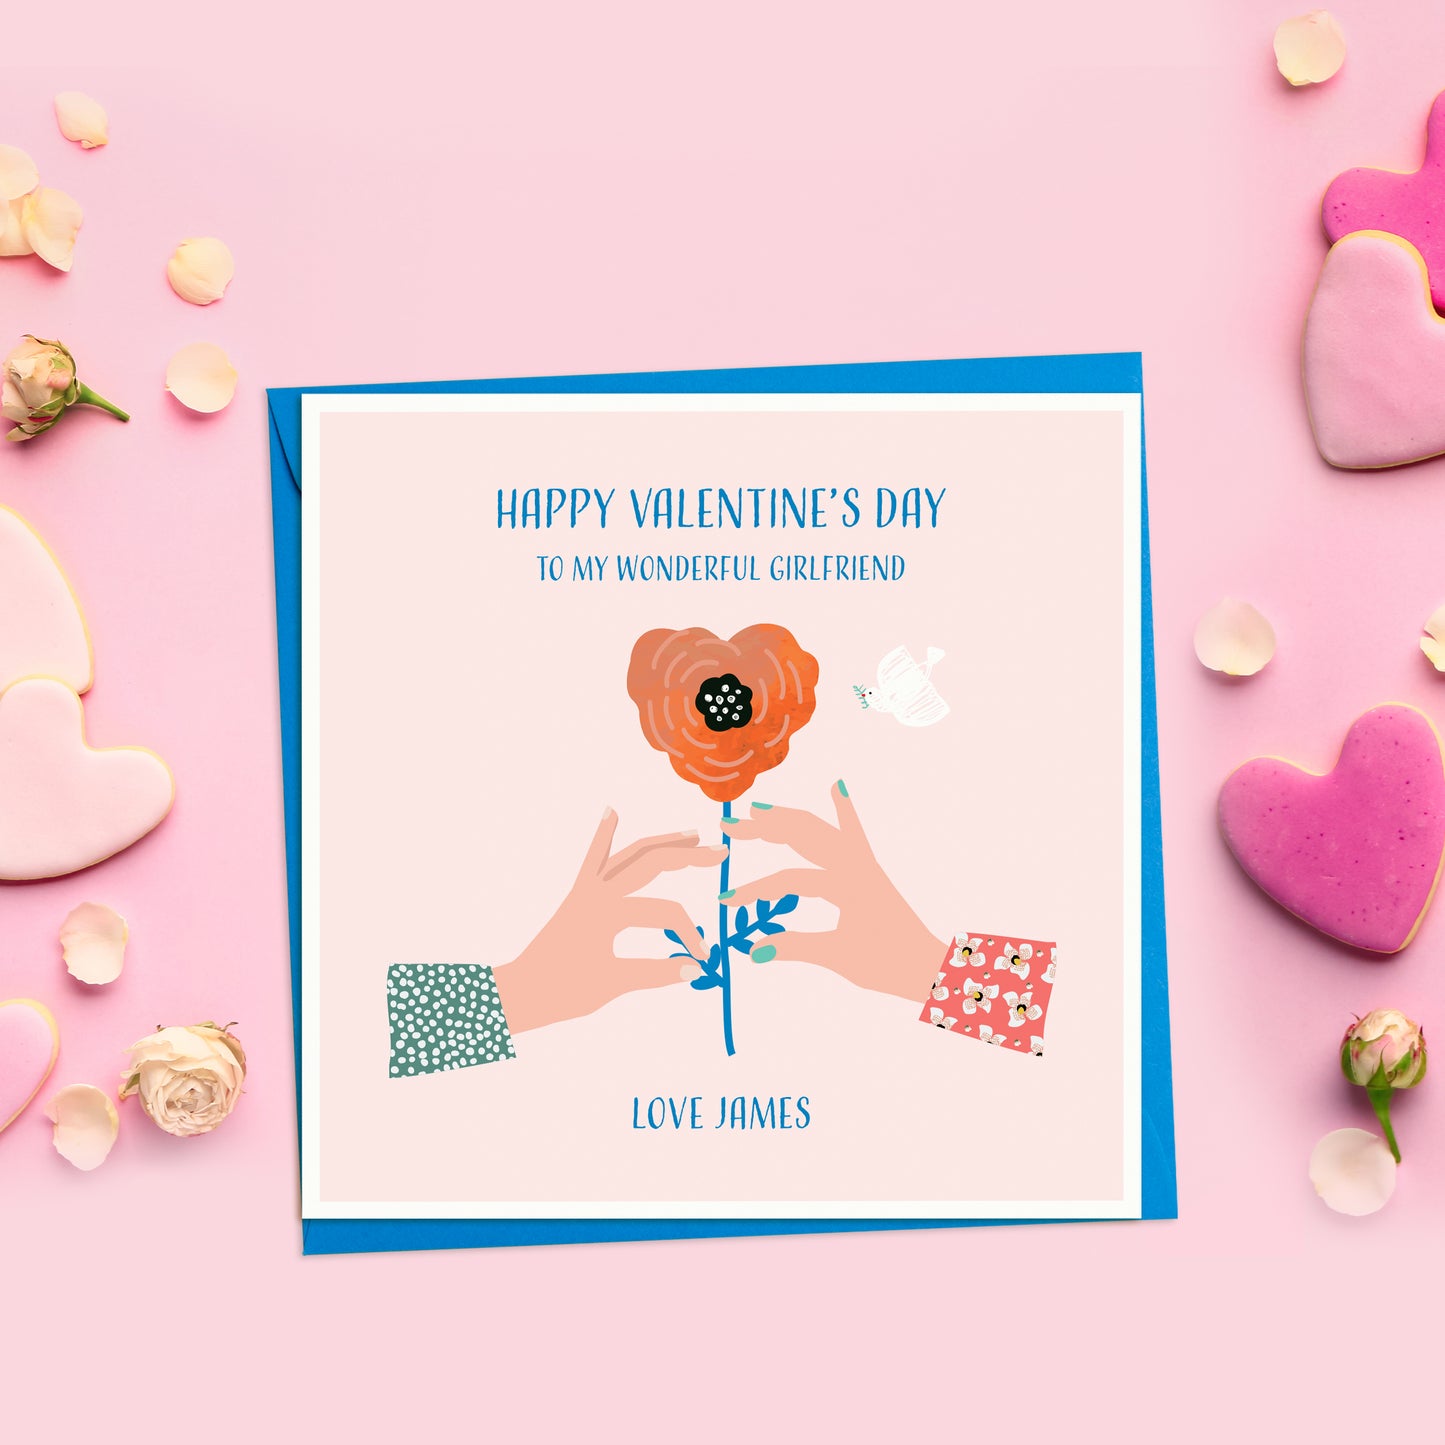 Floral Valentine's Day Card